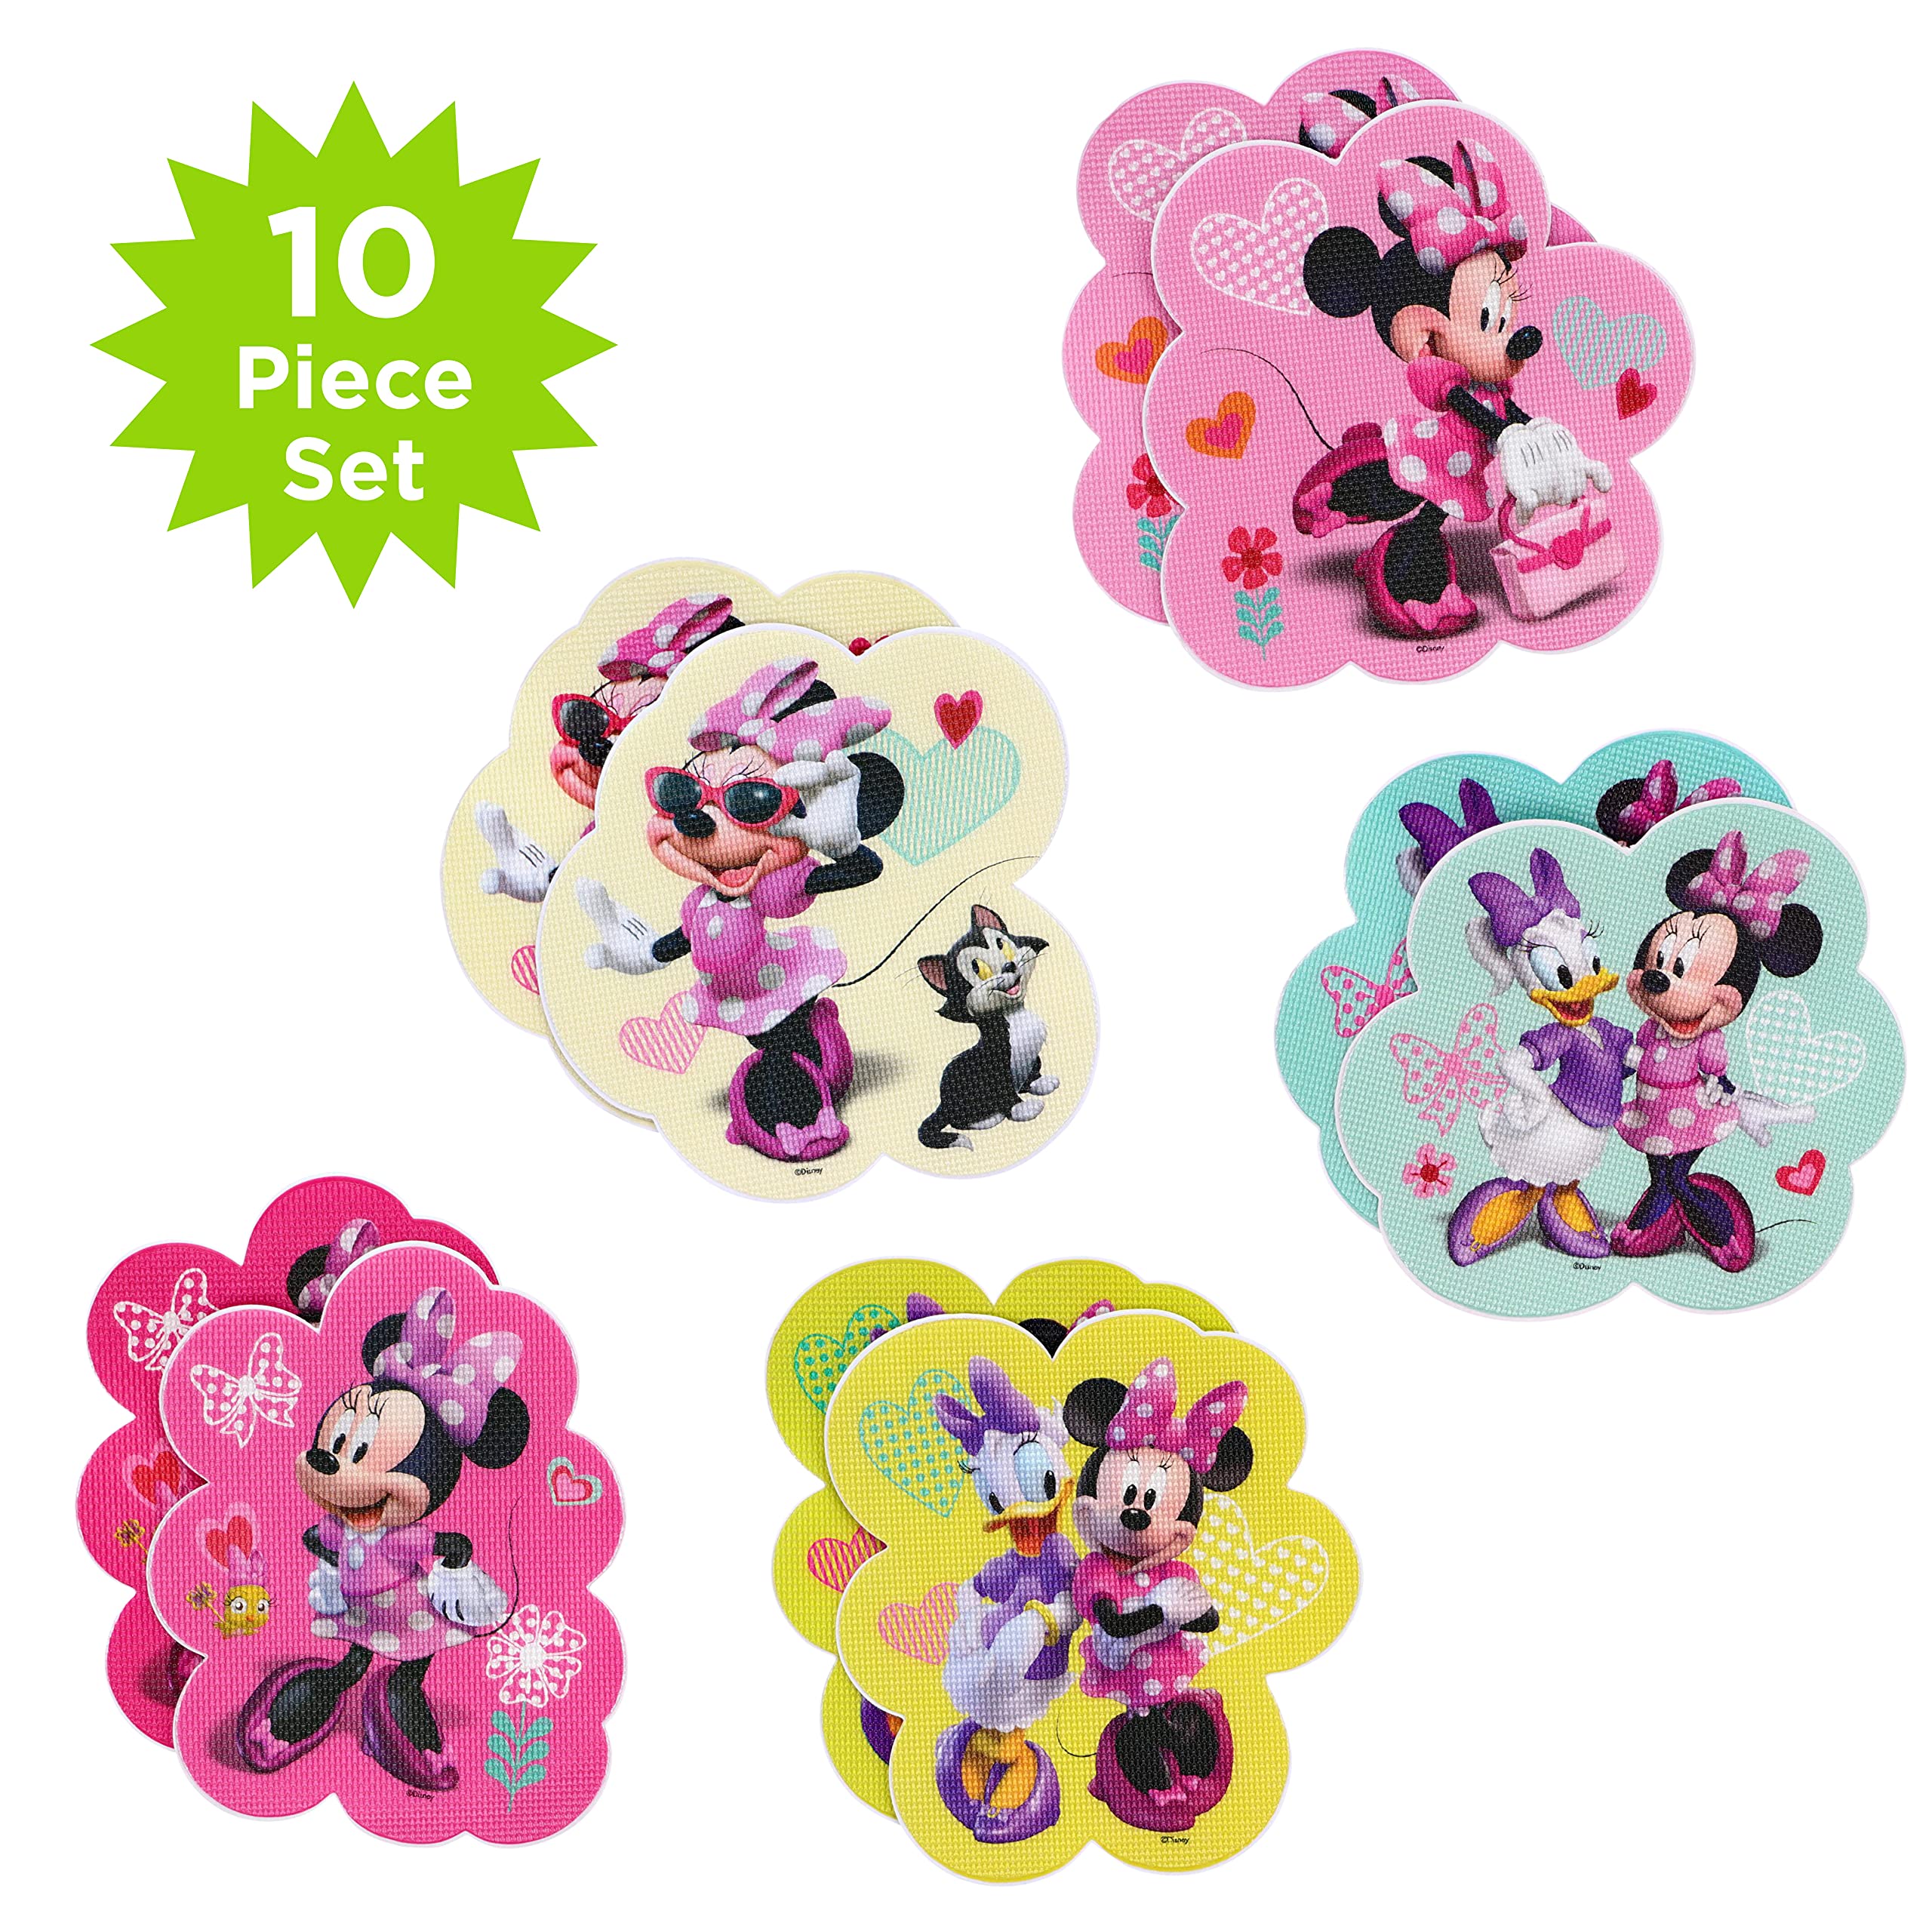 Disney's Minnie Mouse, Daisy, and Figaro Non-Slip Adhesive Tub Applique Decals for Kid's Shower and Bath Safety, Multicolor, 10 Pieces